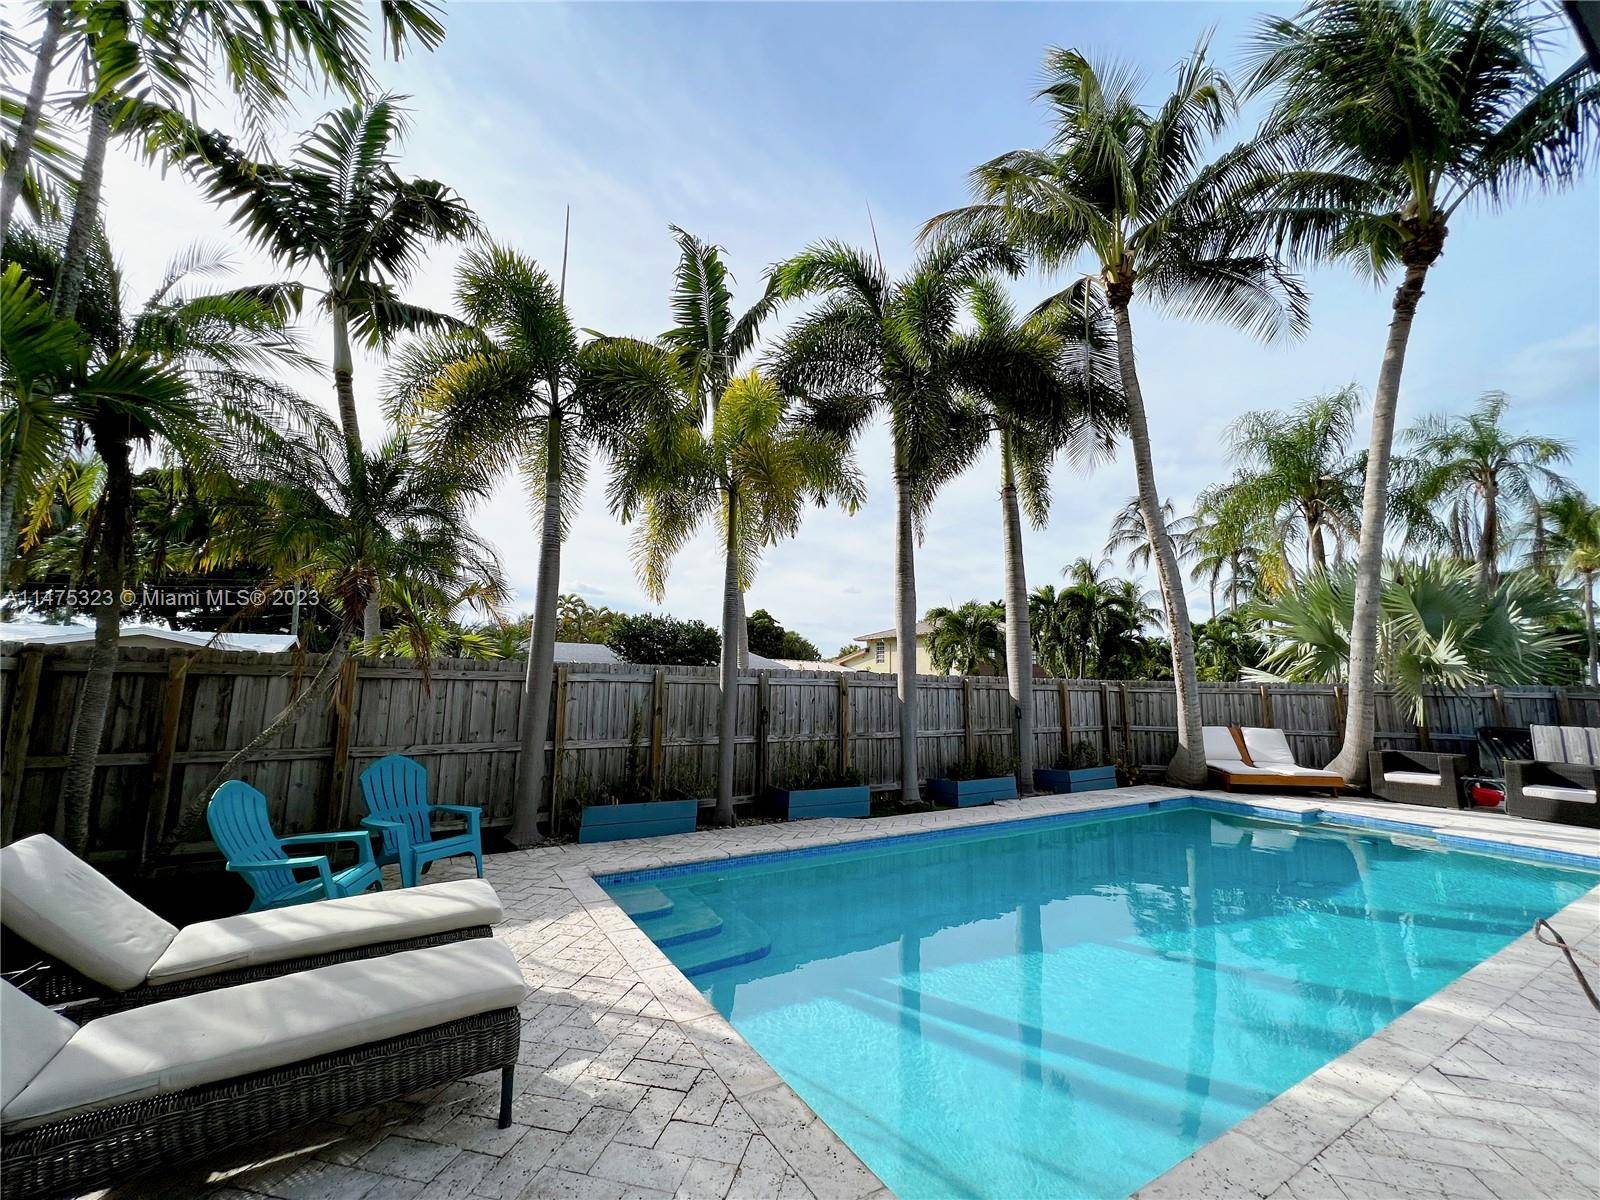 Experience the epitome of tropical luxury living on this pristine corner lot with tropical landscaping, large pool, and freshly updated exterior and interior !